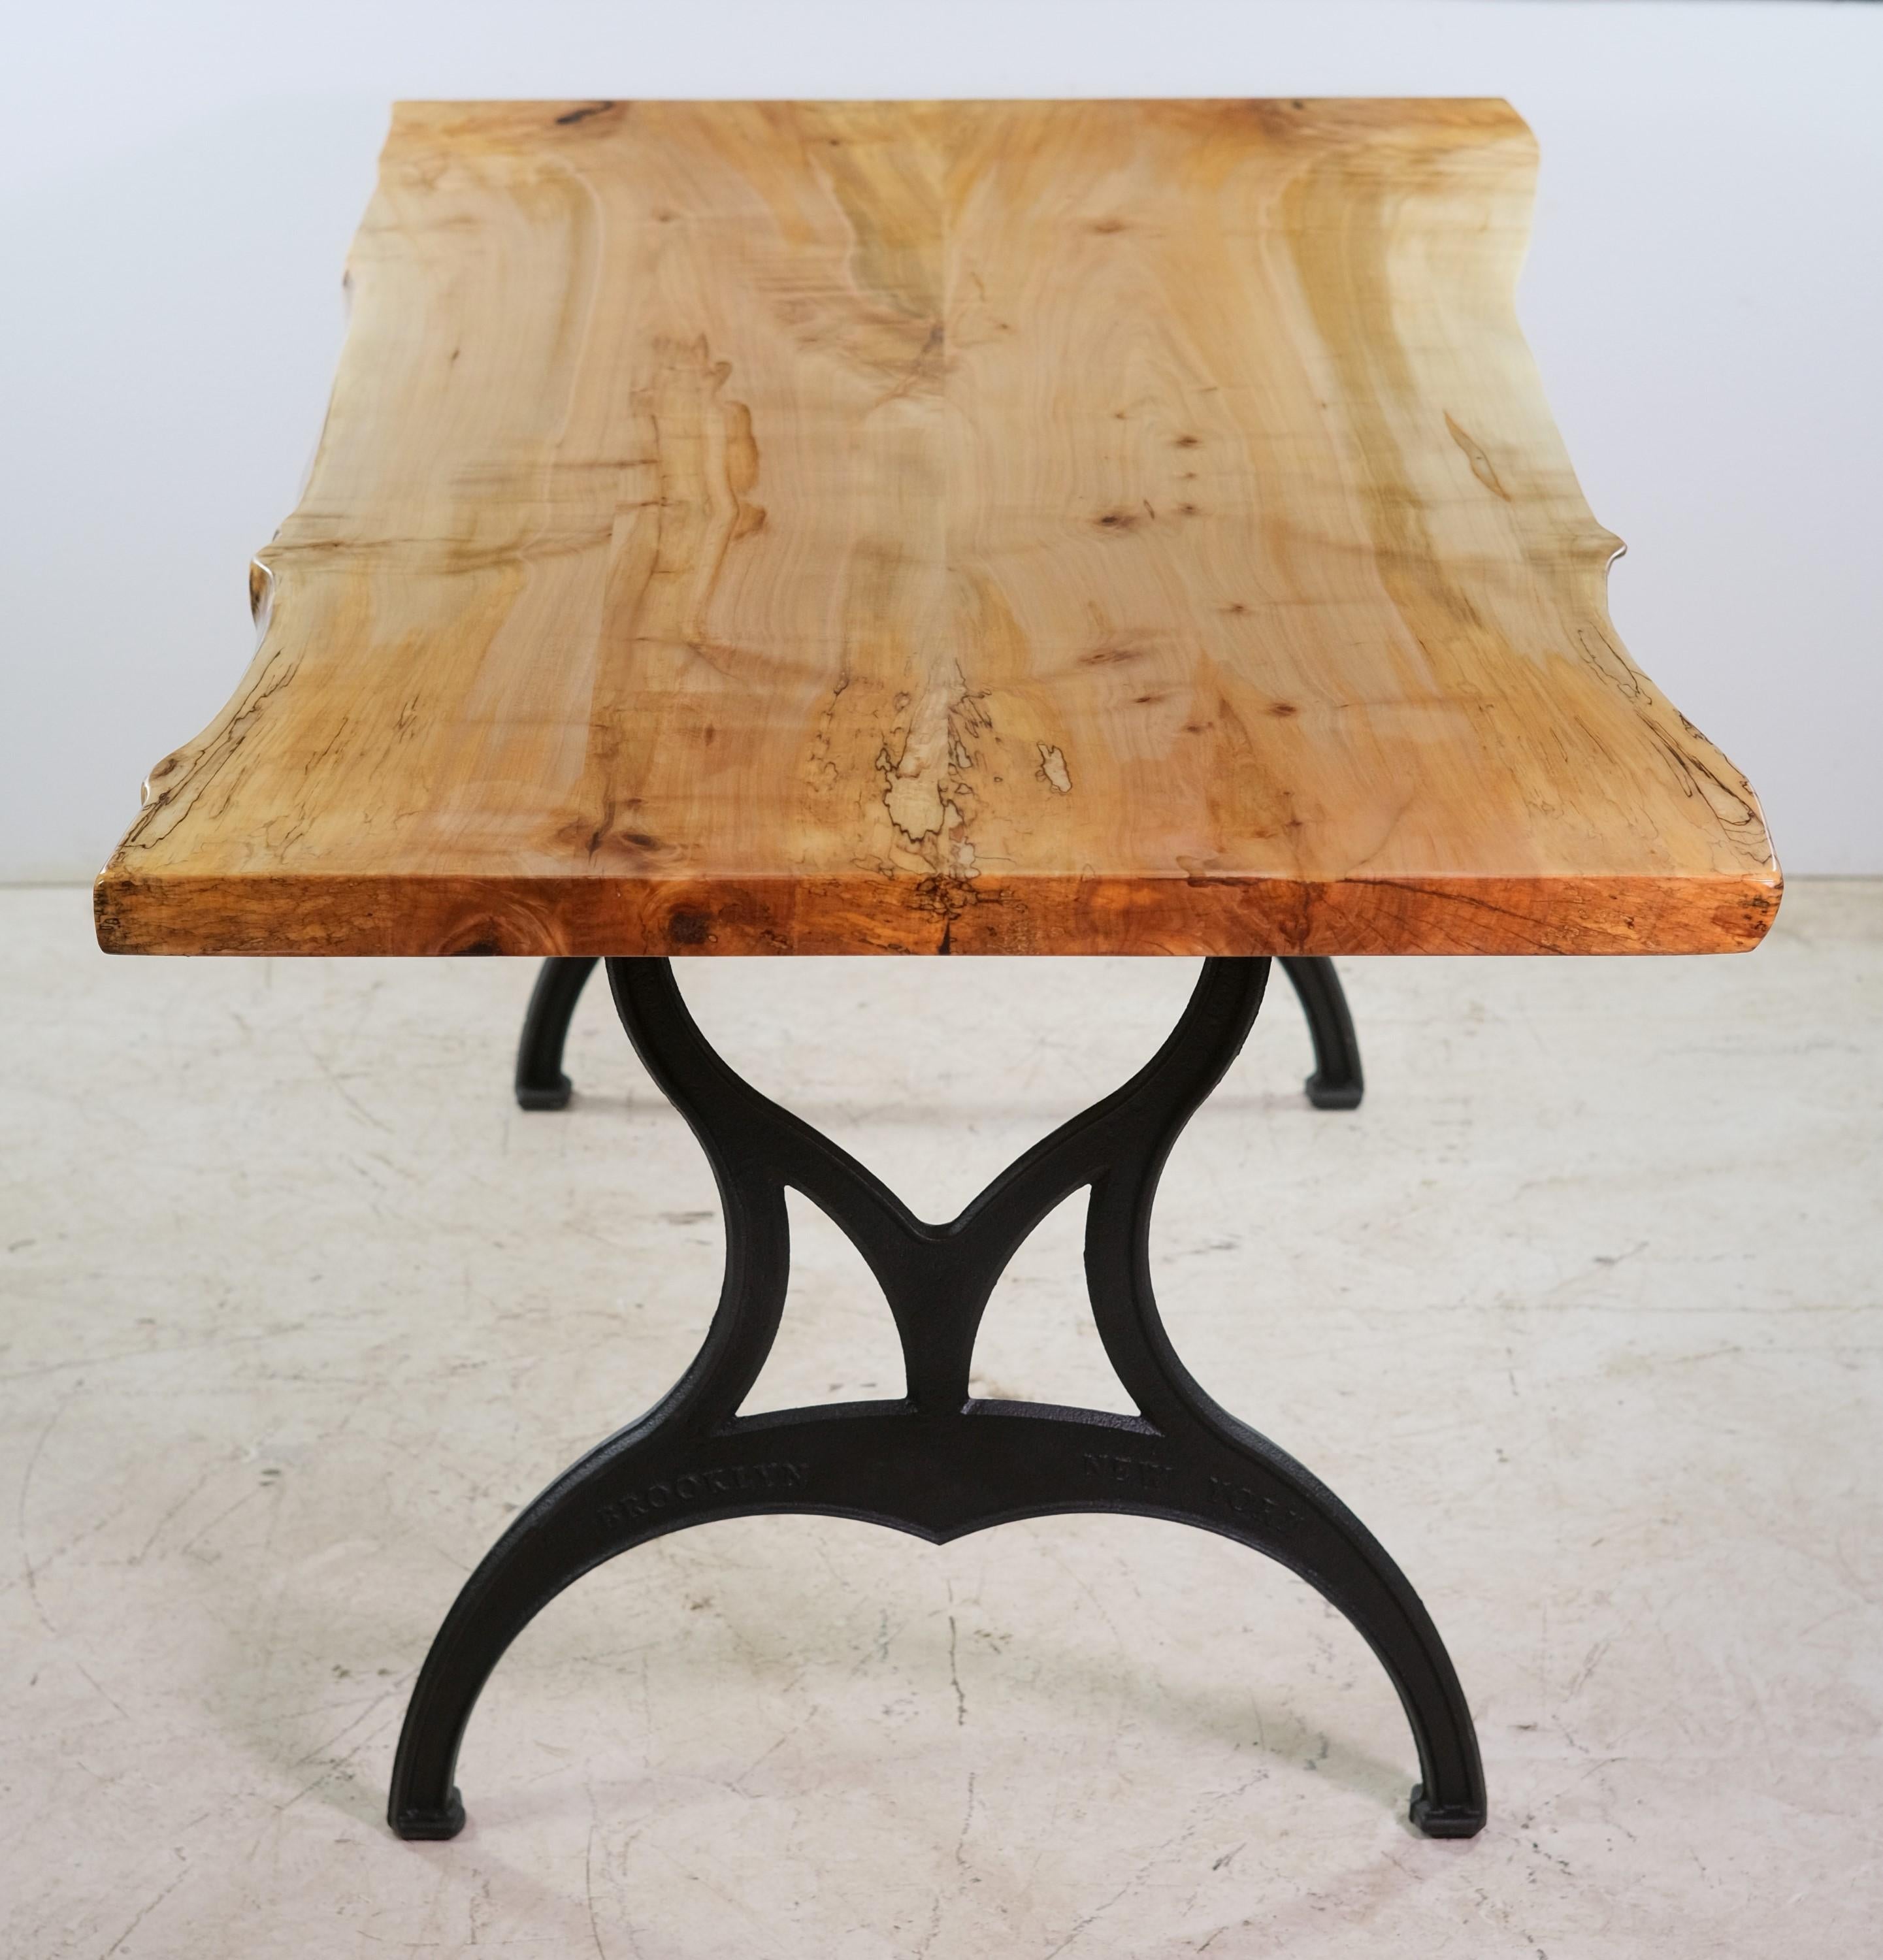 Made in 2022, this two piece live edge maple table top is matched to newly cast iron industrial legs. Each leg says Brooklyn, NY in raised lettering. This can be seen at our 2420 Broadway location on the upper west side in Manhattan.